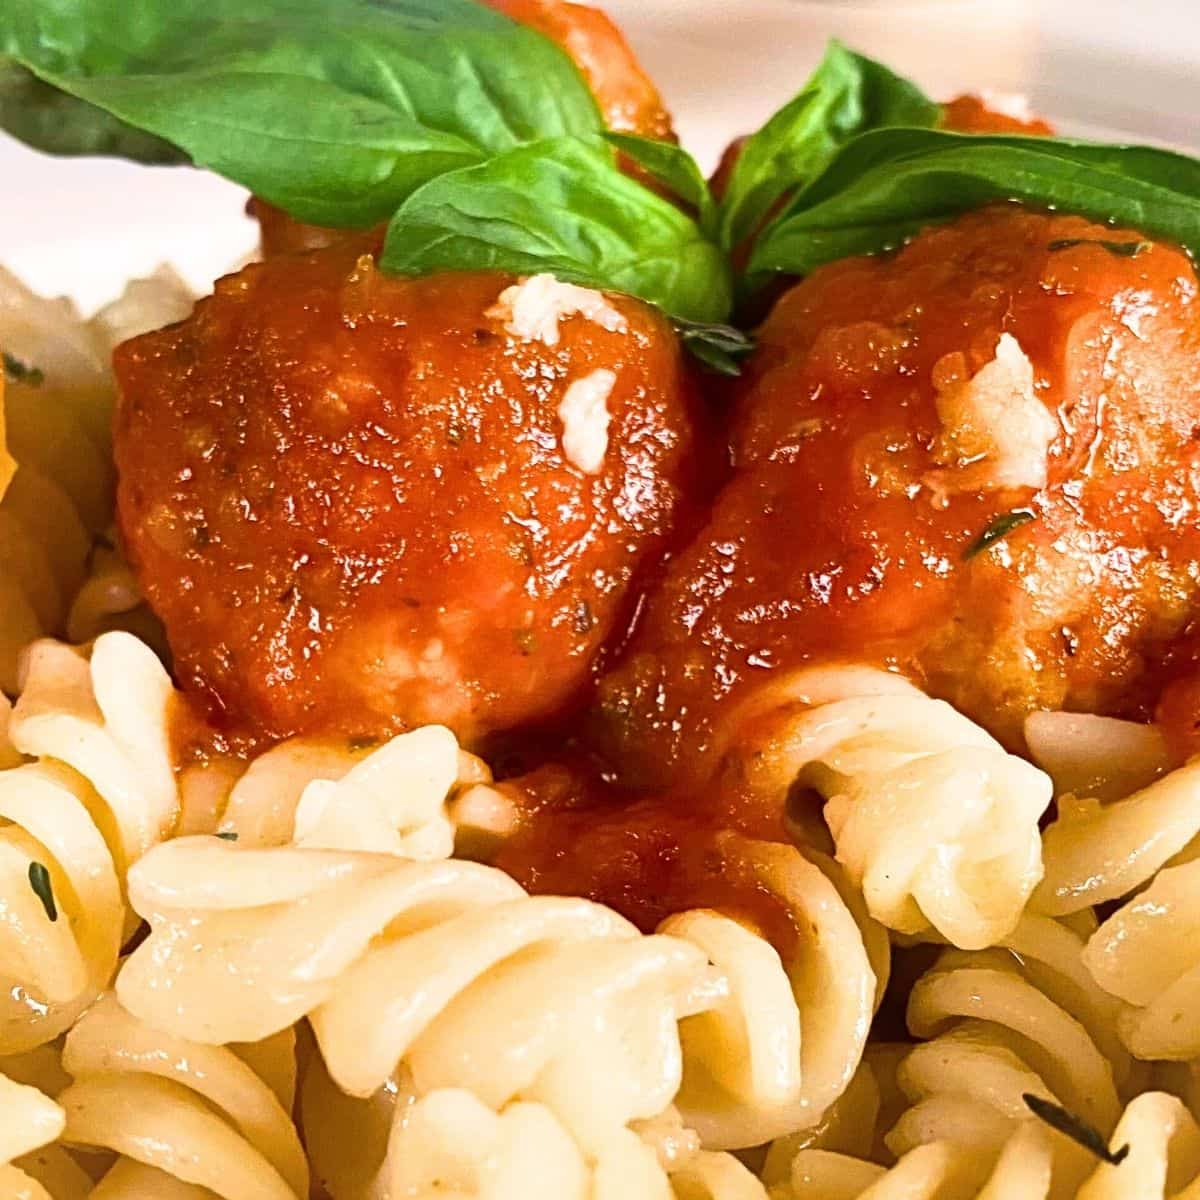 A close up of meatballs and pasta.